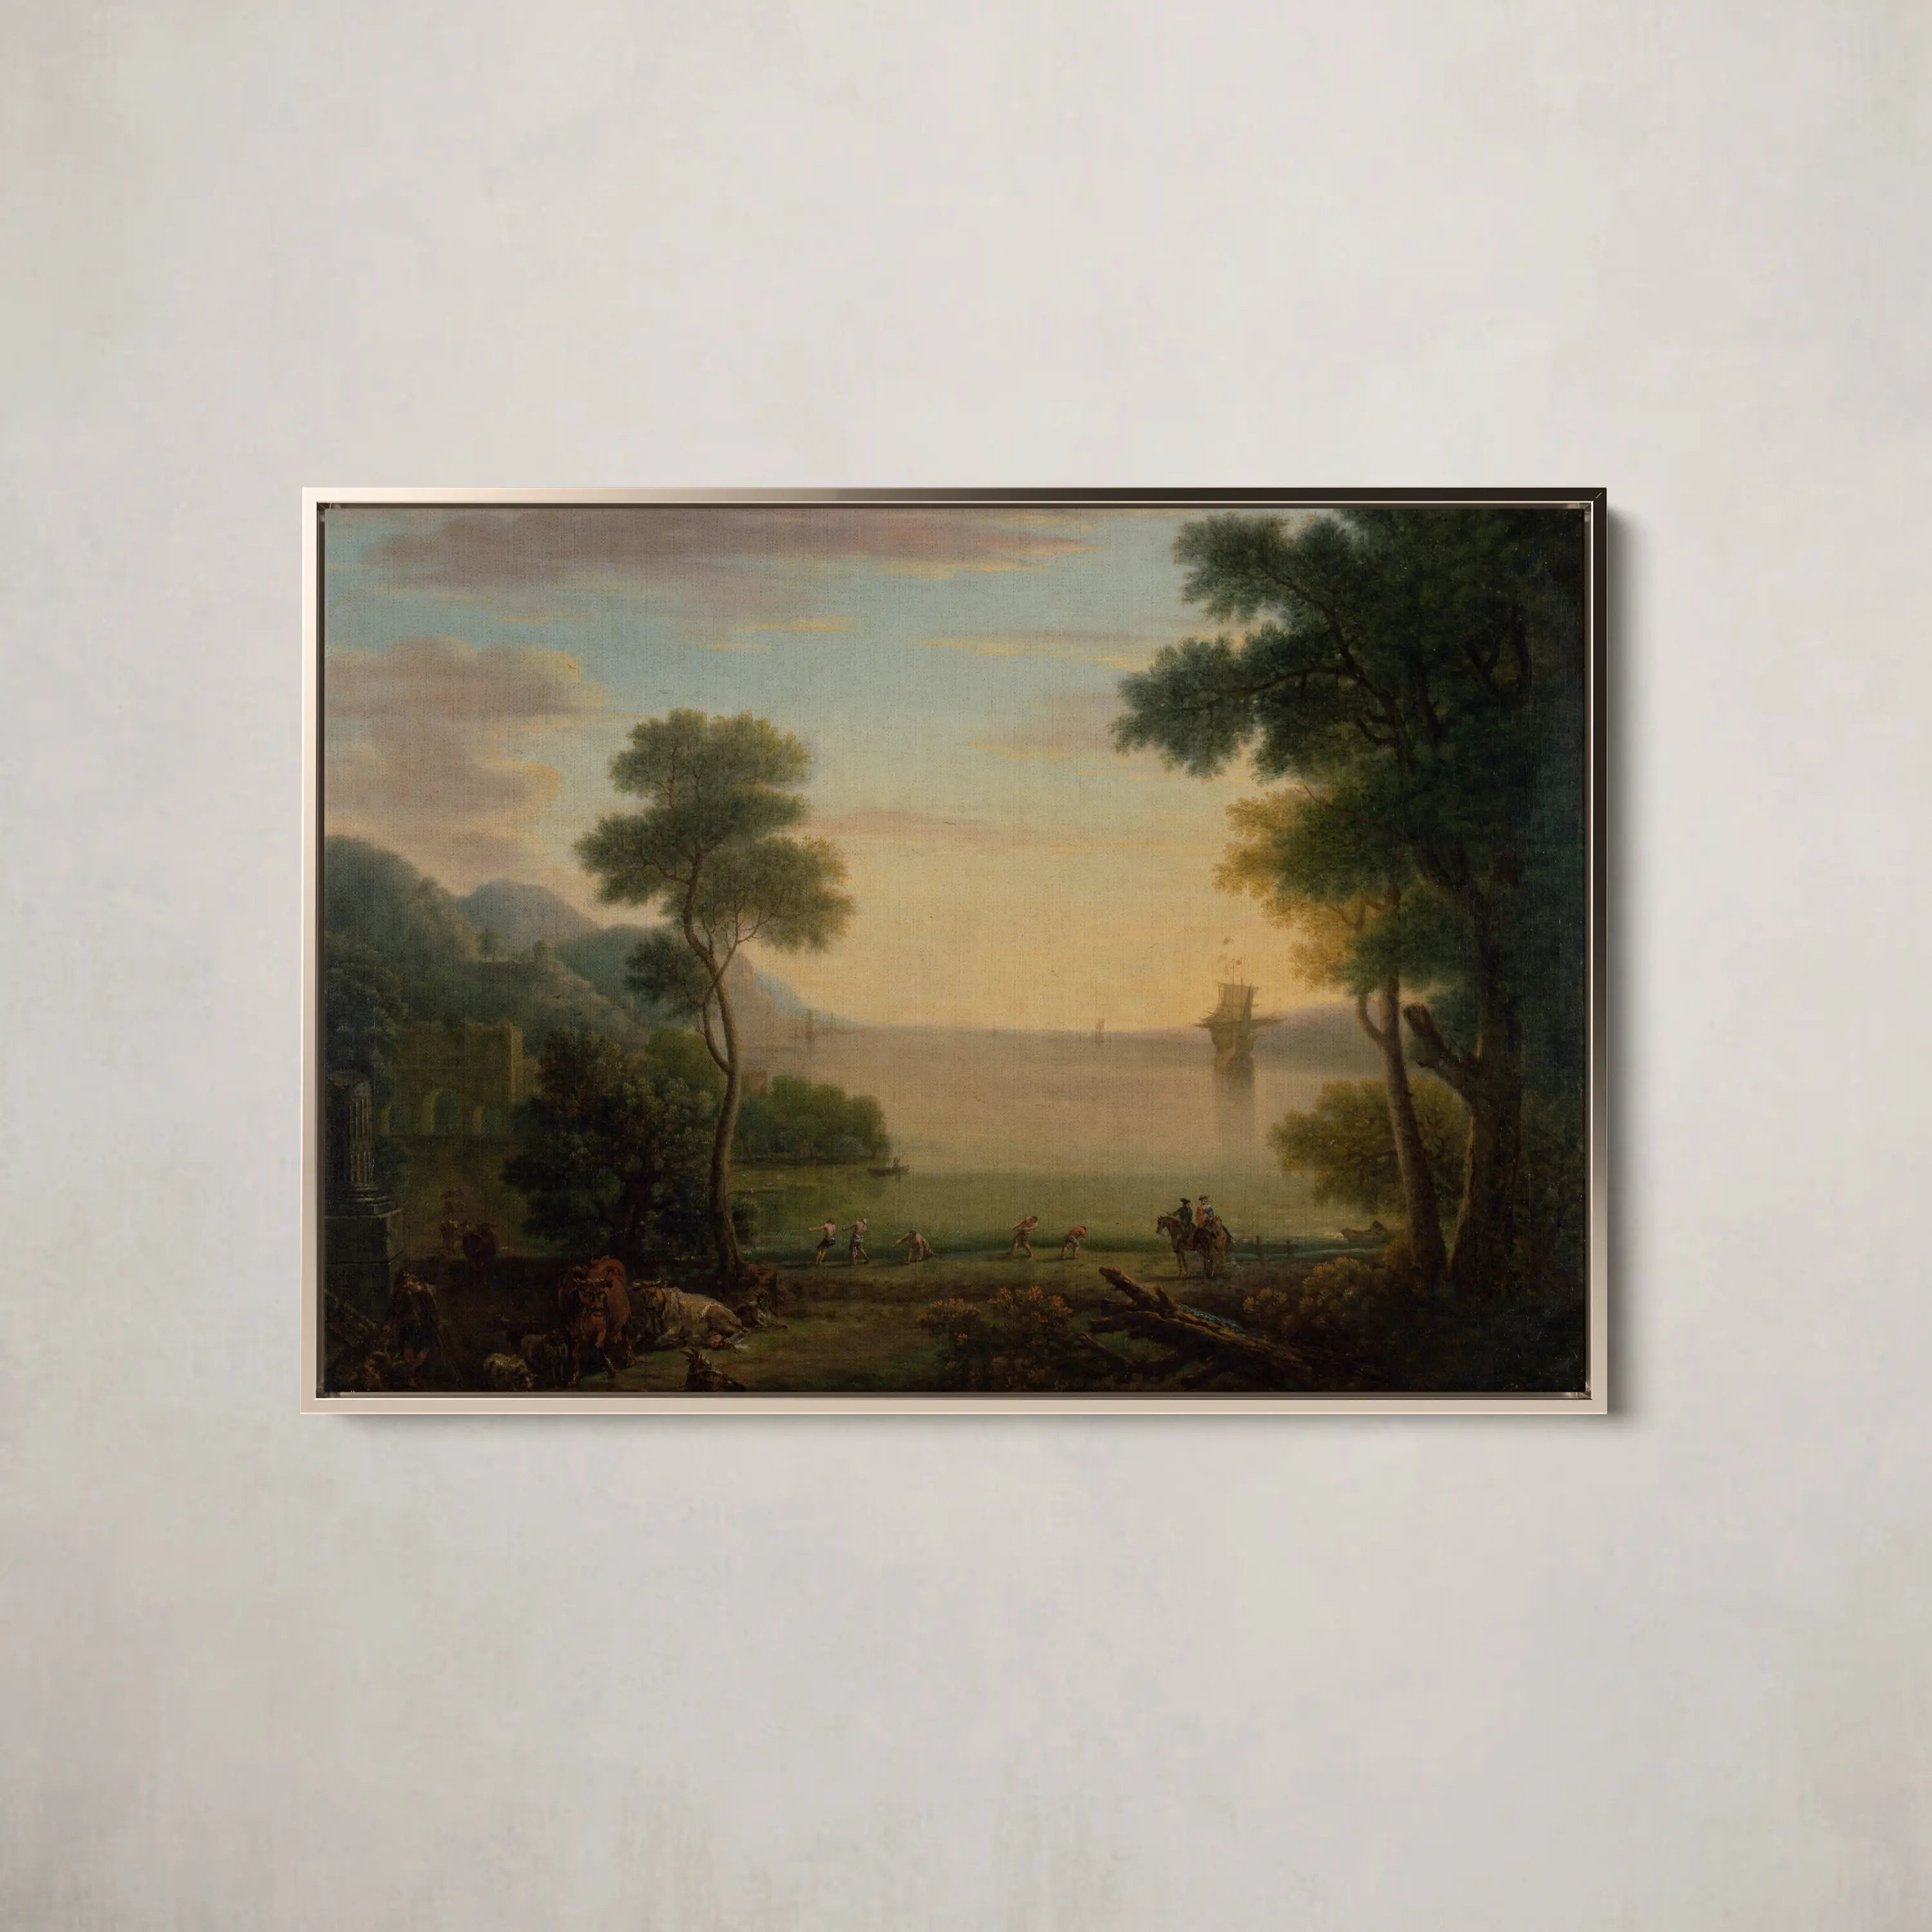 Classical Landscape with Figures and Animals; Sunset (1754) by John Wootton